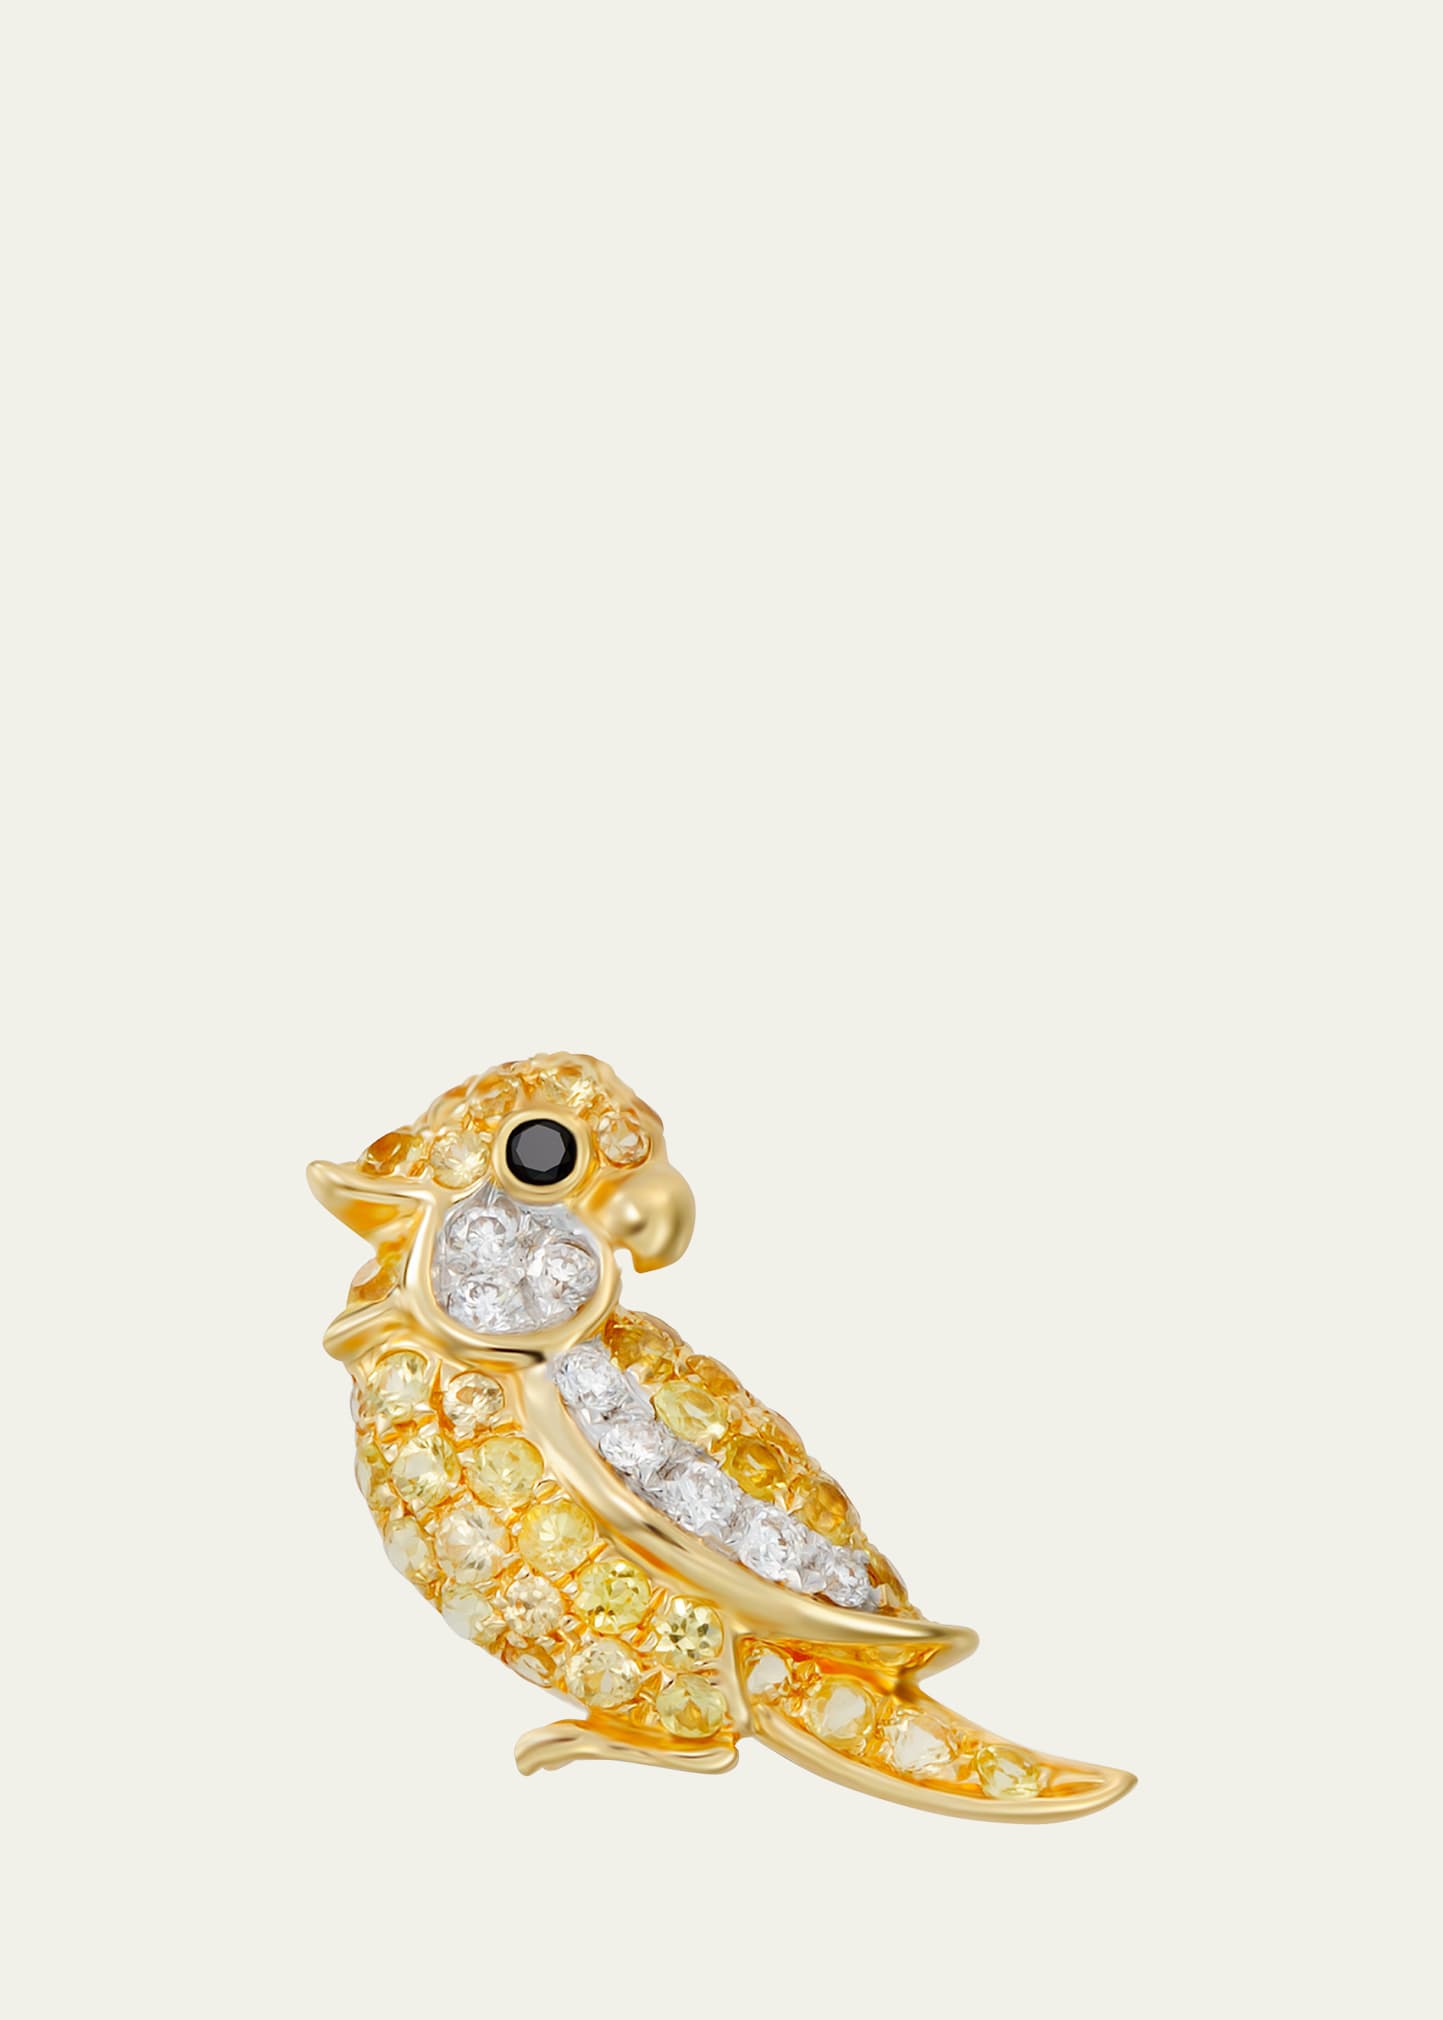 Mio Harutaka 18k Yellow Gold Little Bird Single Right Earring With Black And White Diamond And Yellow Sapphire